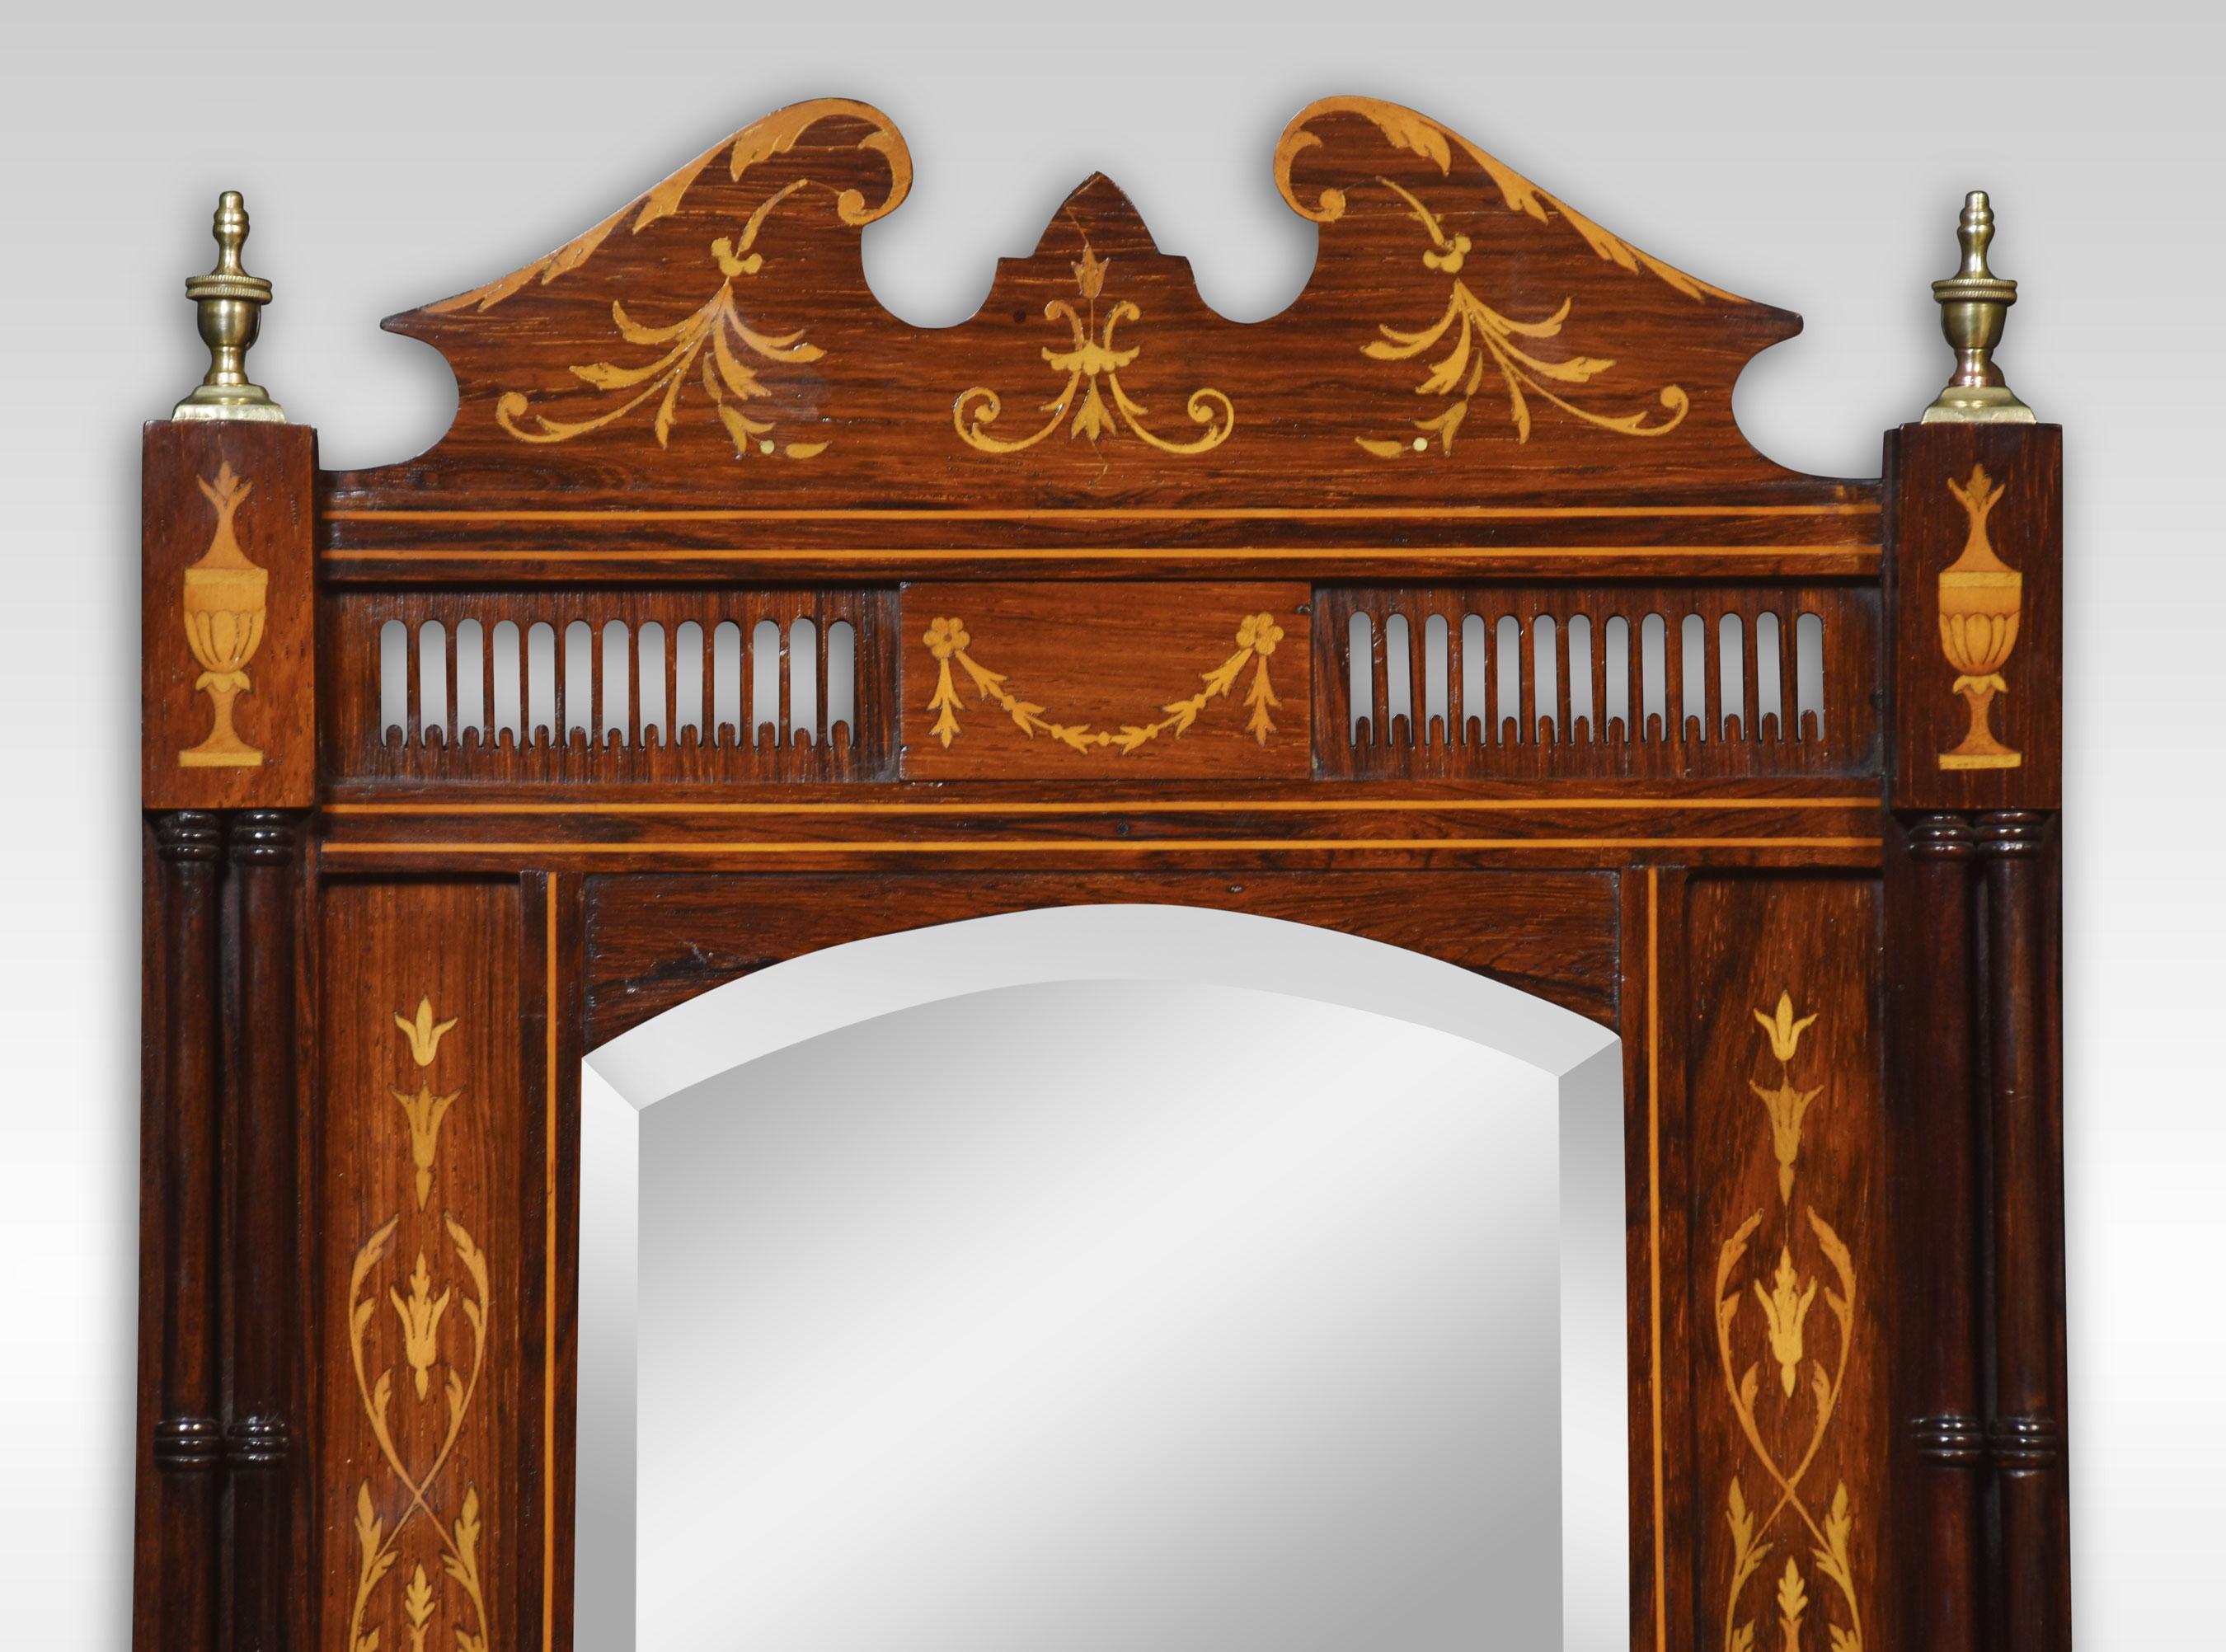 Wall mirror, the molded pediment with scrolling inlaid detail,flanked by brass urn capitals and similar inlaid urns bellow supported on turned colums. To the original beveled mirror plate encased in rosewood frame. Above bow fronted shelf with